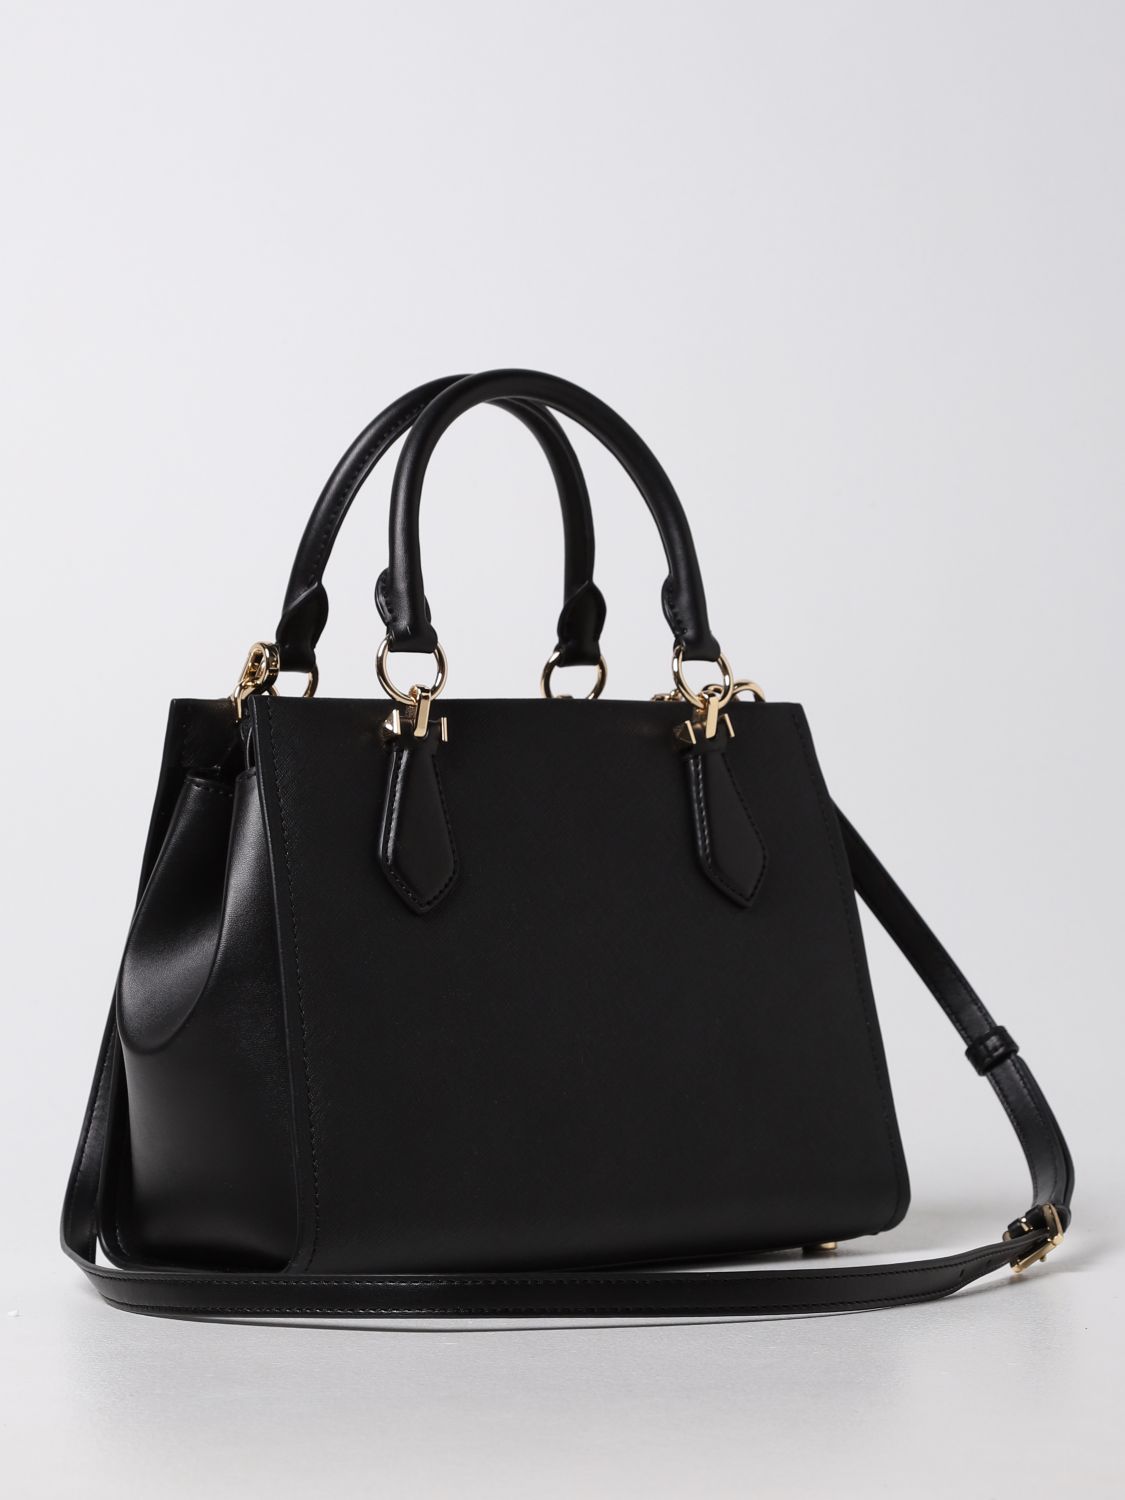 MICHAEL KORS: Marilyn Michael bag in Saffiano leather - Black | Michael  Kors tote bags 30S2G6AS2L online on 